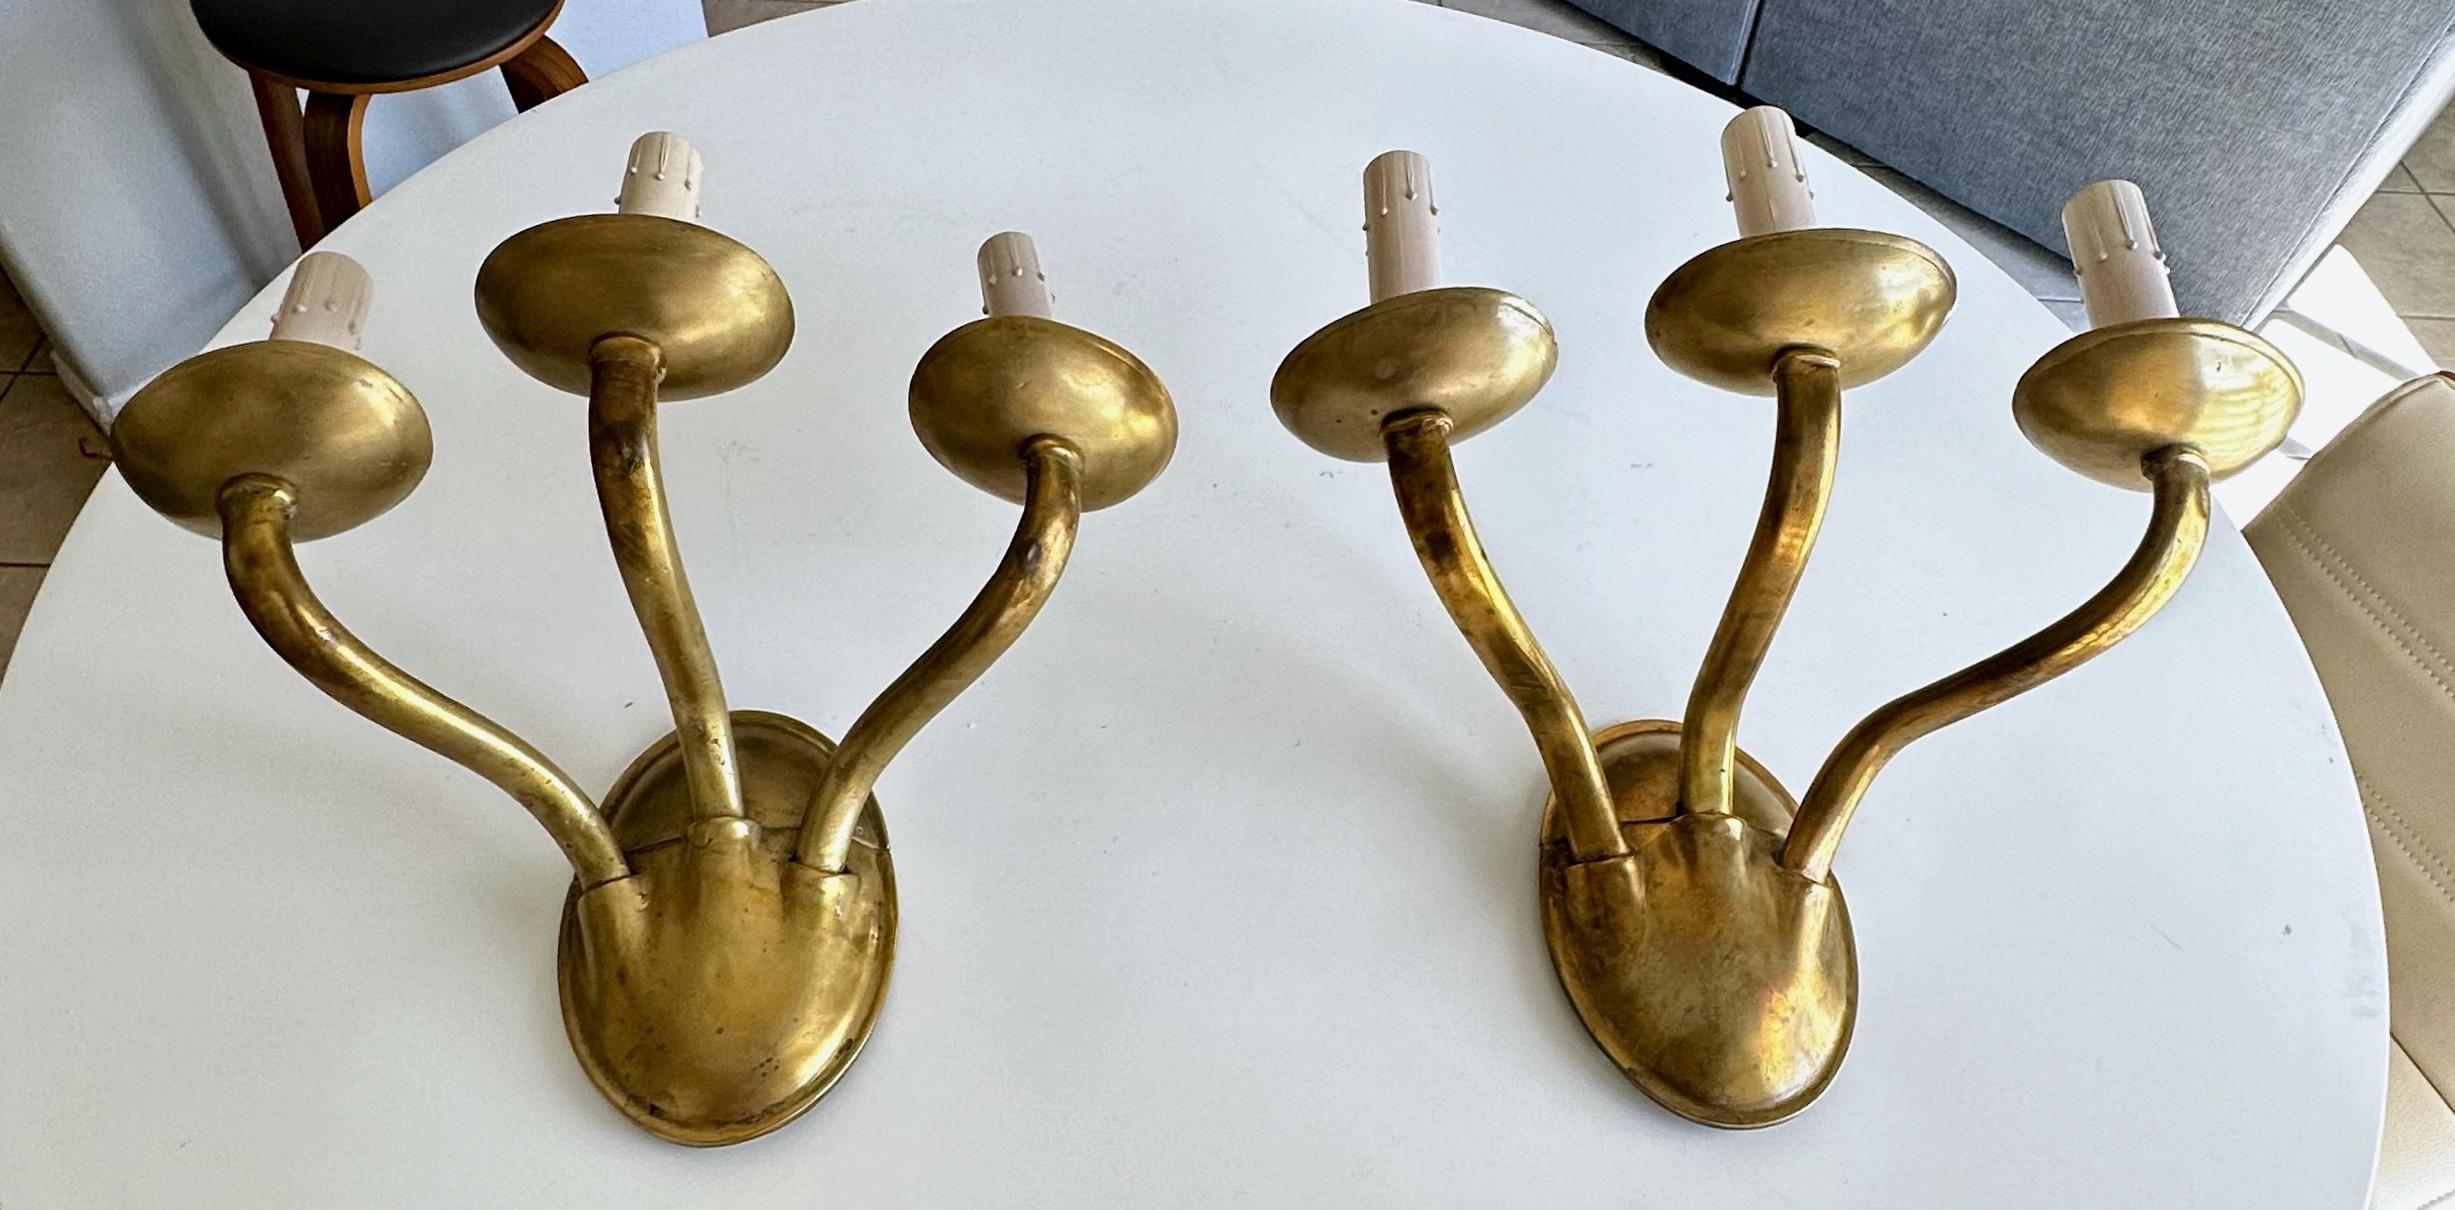 Pair of large and heavy solid brass or bronze three-arm wall sconces in the Arts & Crafts style by E F Caldwell, New York. Each sconce is stamped twice with the Caldwell 